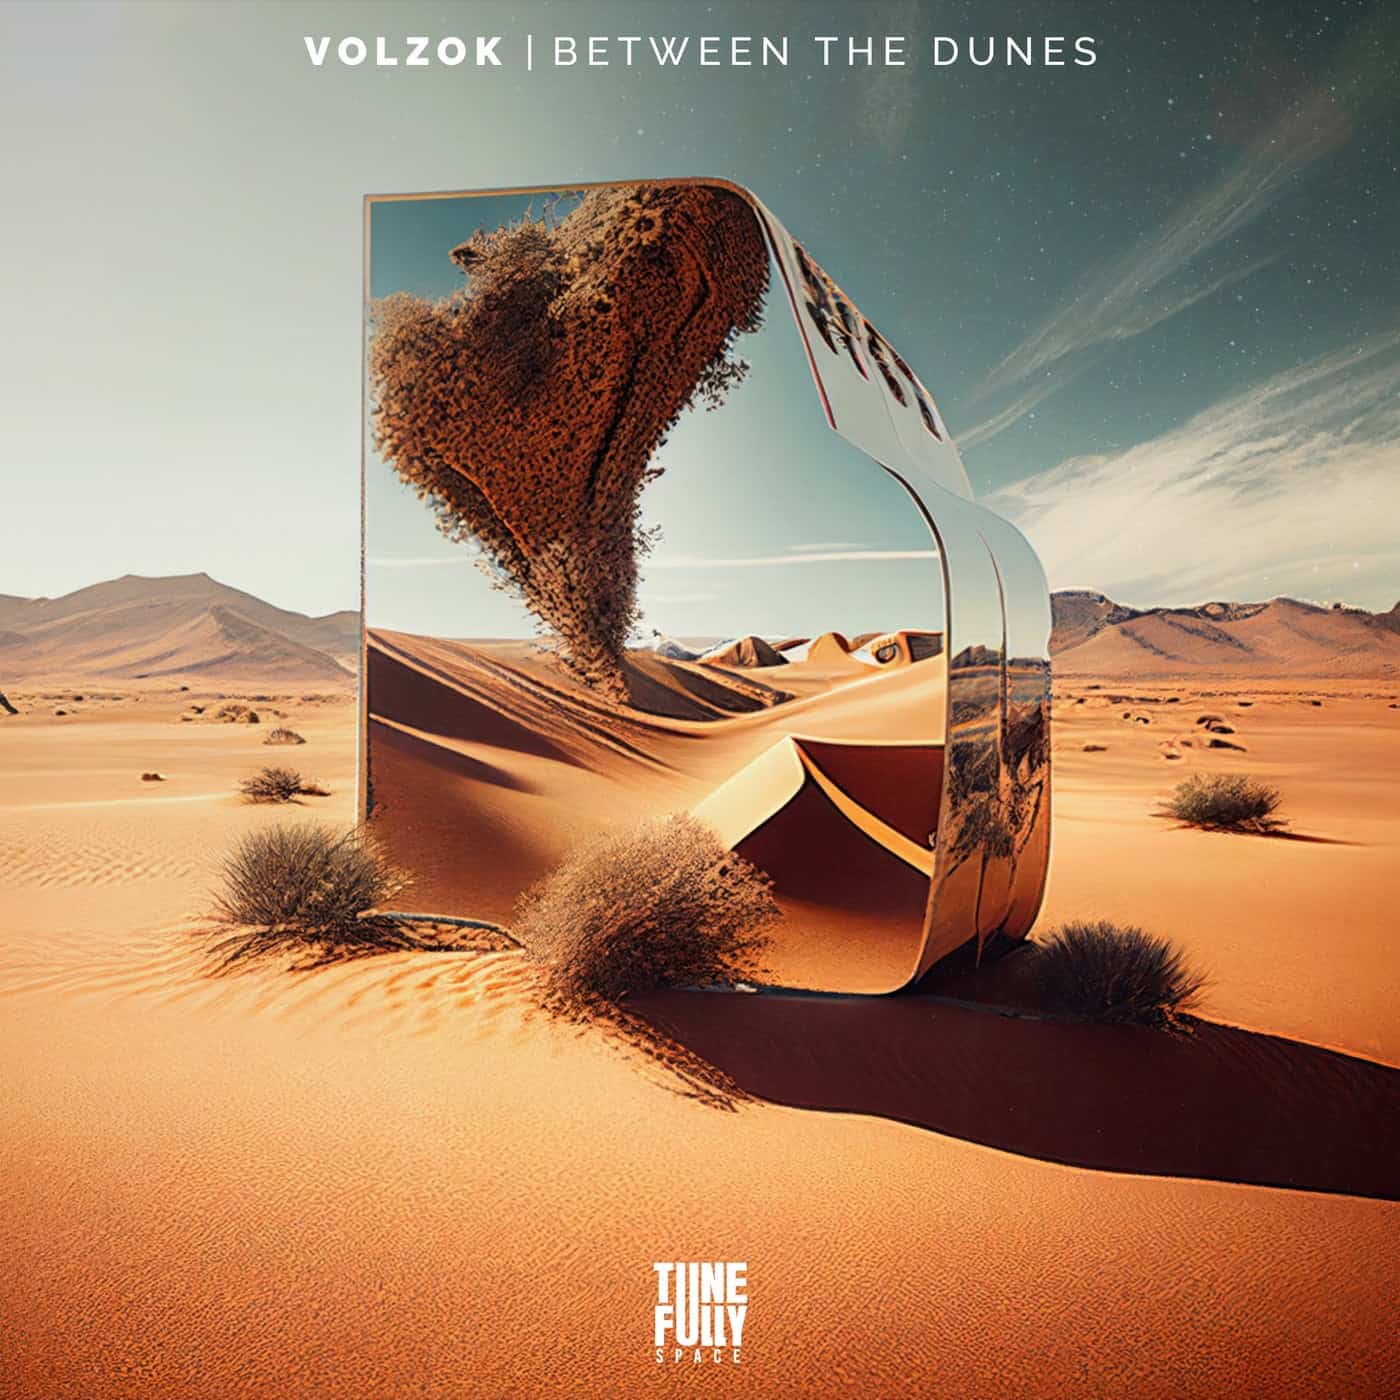 image cover: Between the Dunes by Volzok on Tunefully Space